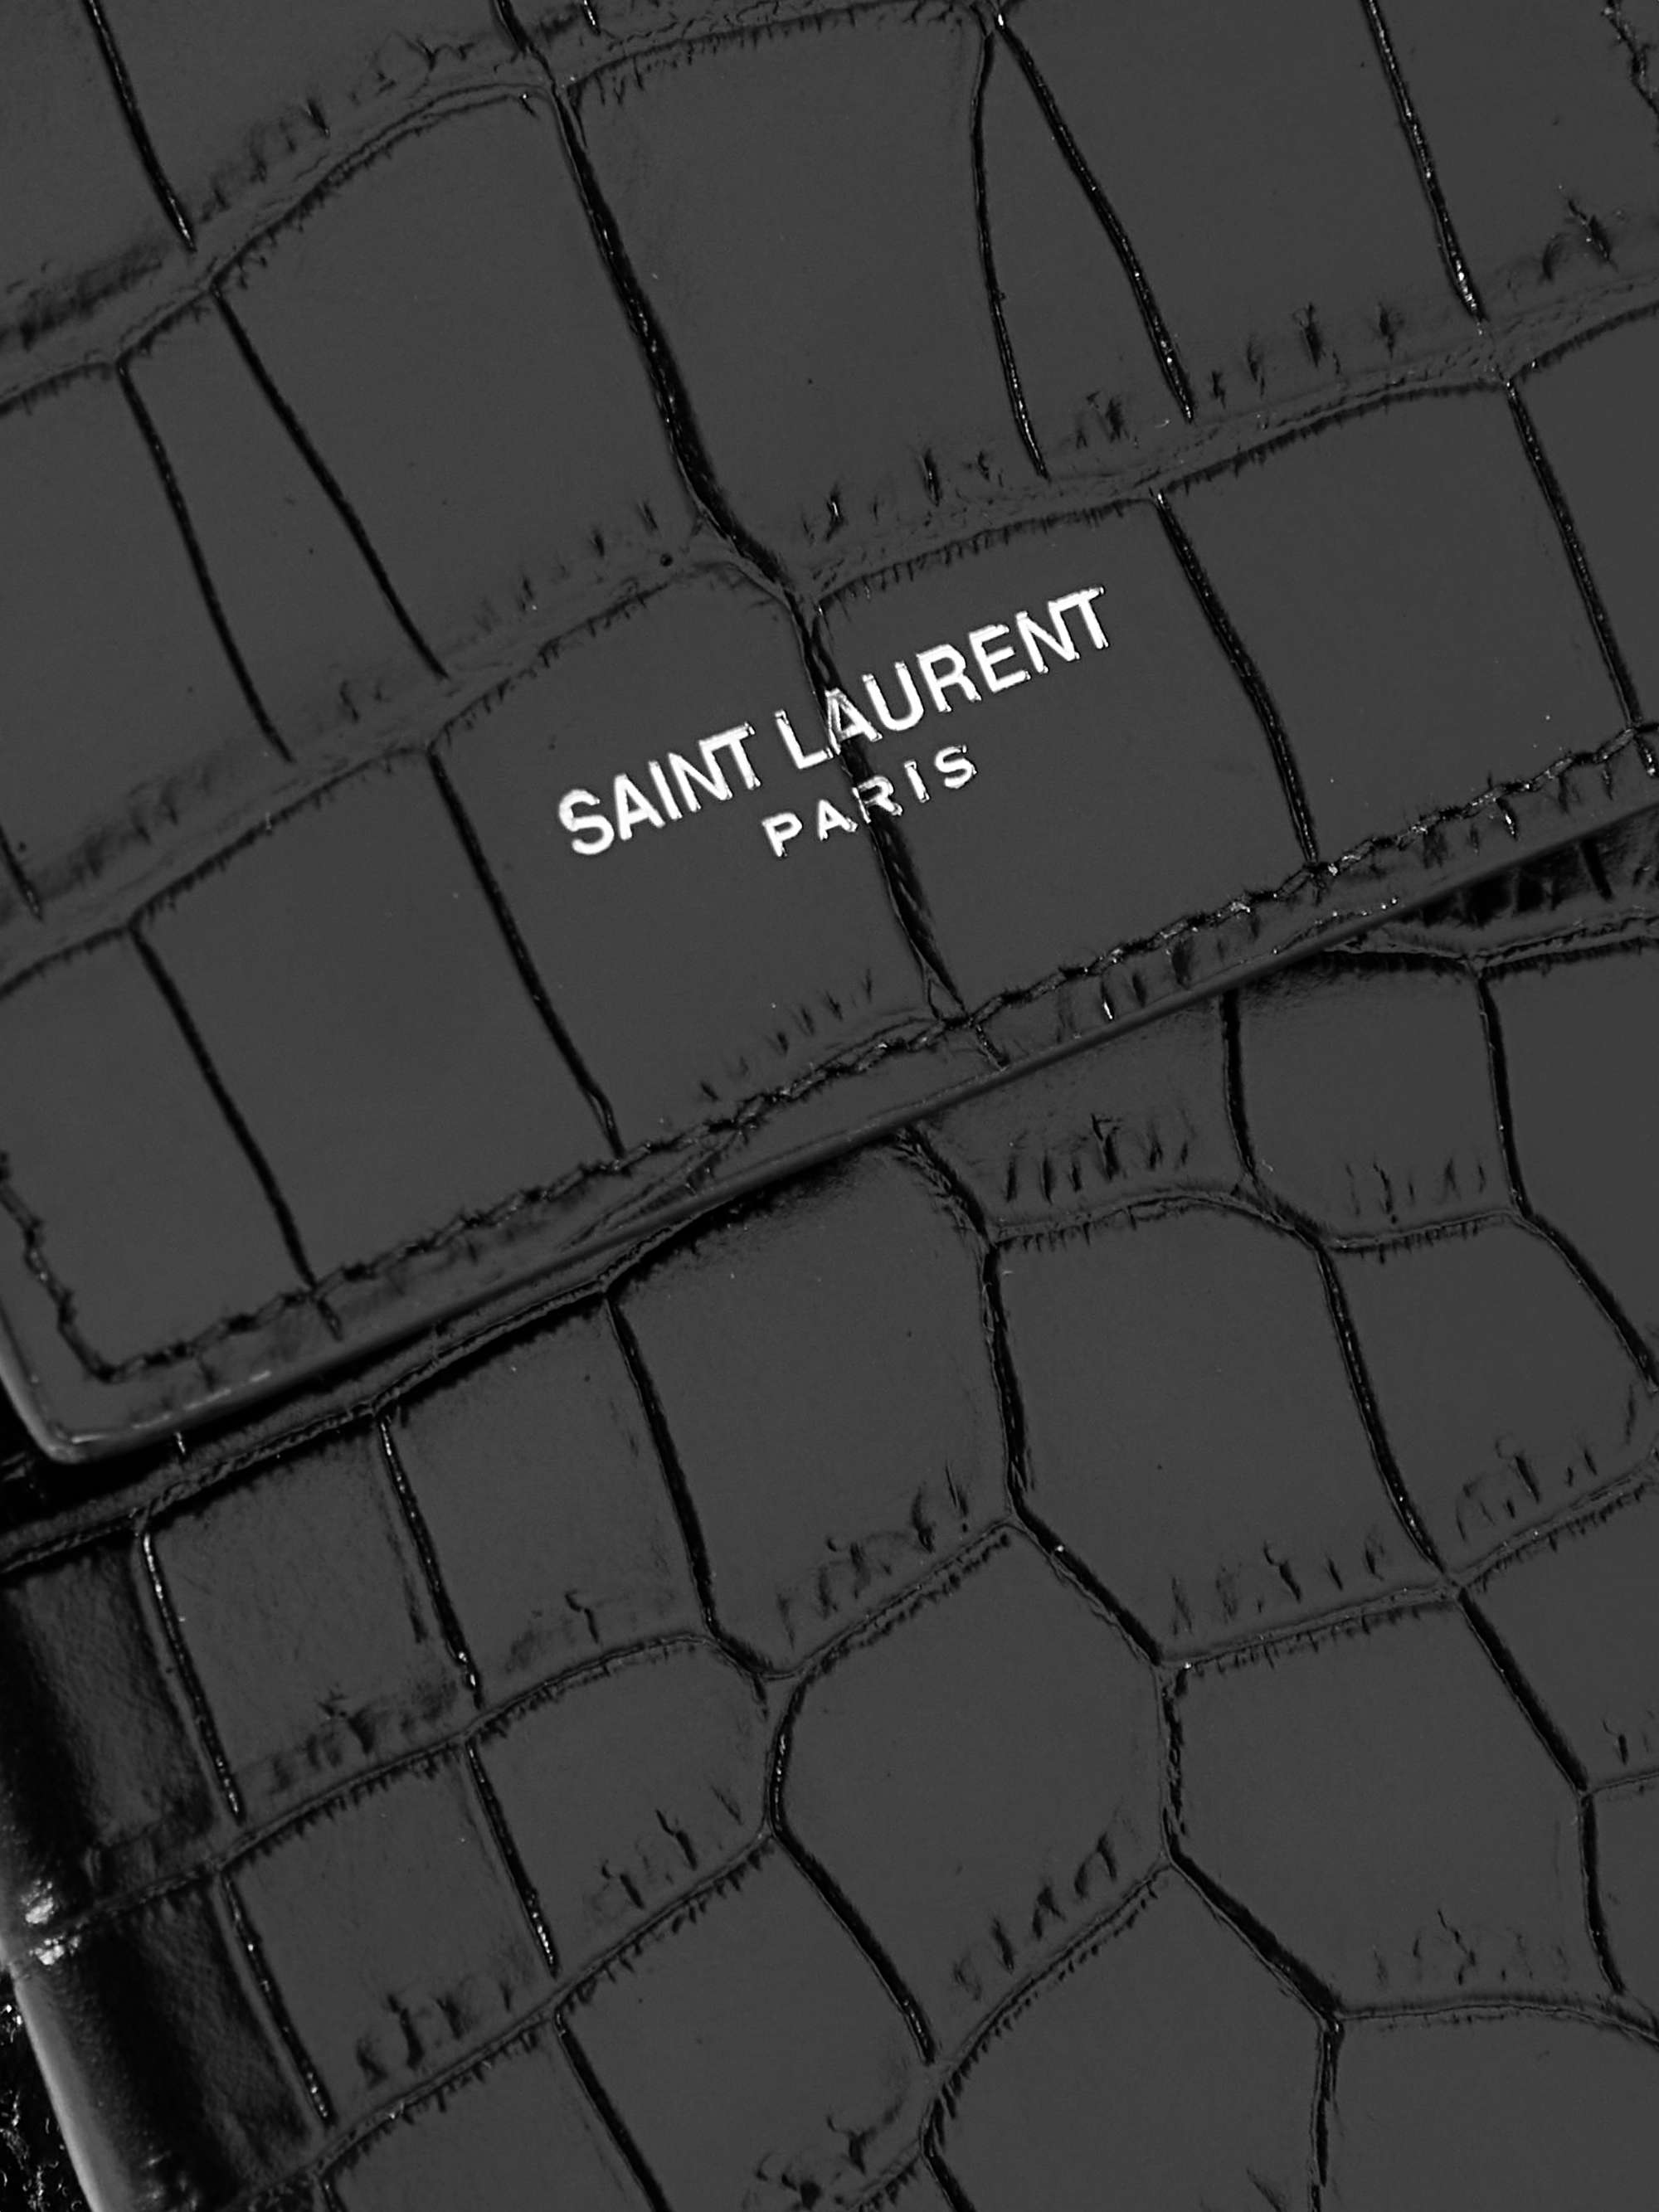 SAINT LAURENT Croc-Effect Leather Phone Pouch with Lanyard